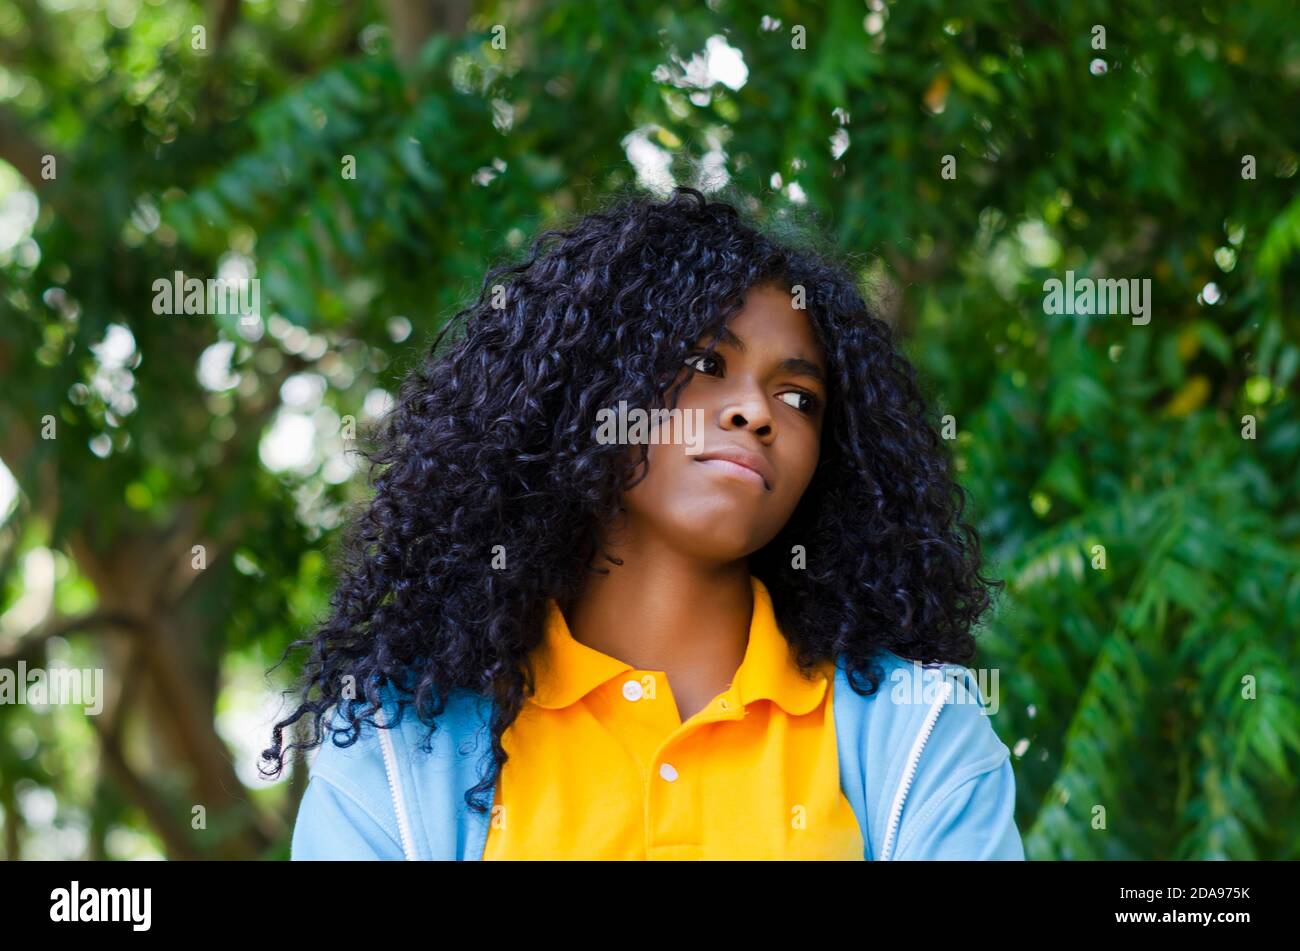 Young black woman 20-25 years old with curly hair in annoyance or dissatisfaction Stock Photo